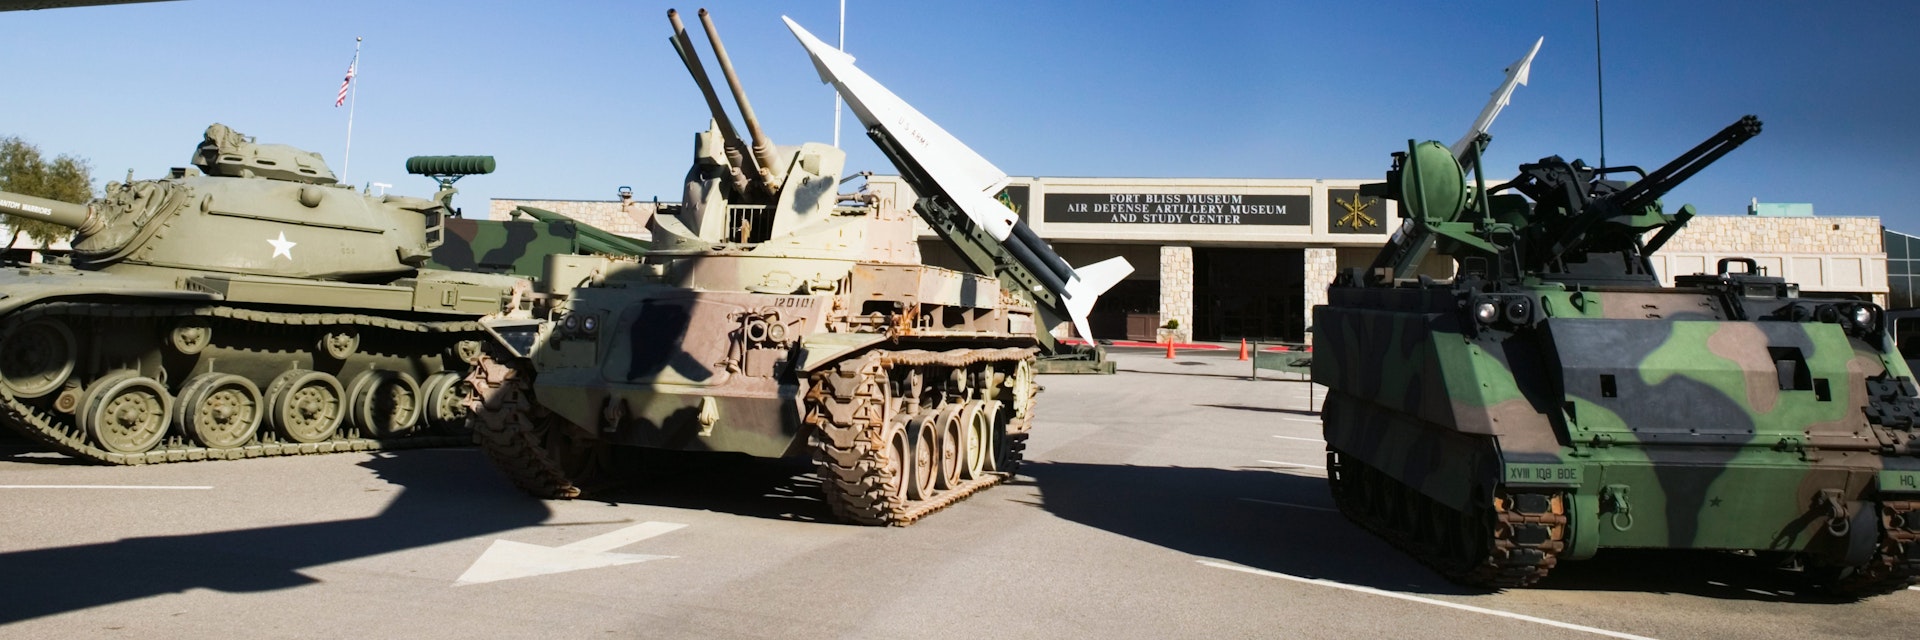 USA, Texas, El Paso, Fort Bliss US Army Air Defense Artillery Museum - stock photo

First Armored Division & Fort Bliss Museum
